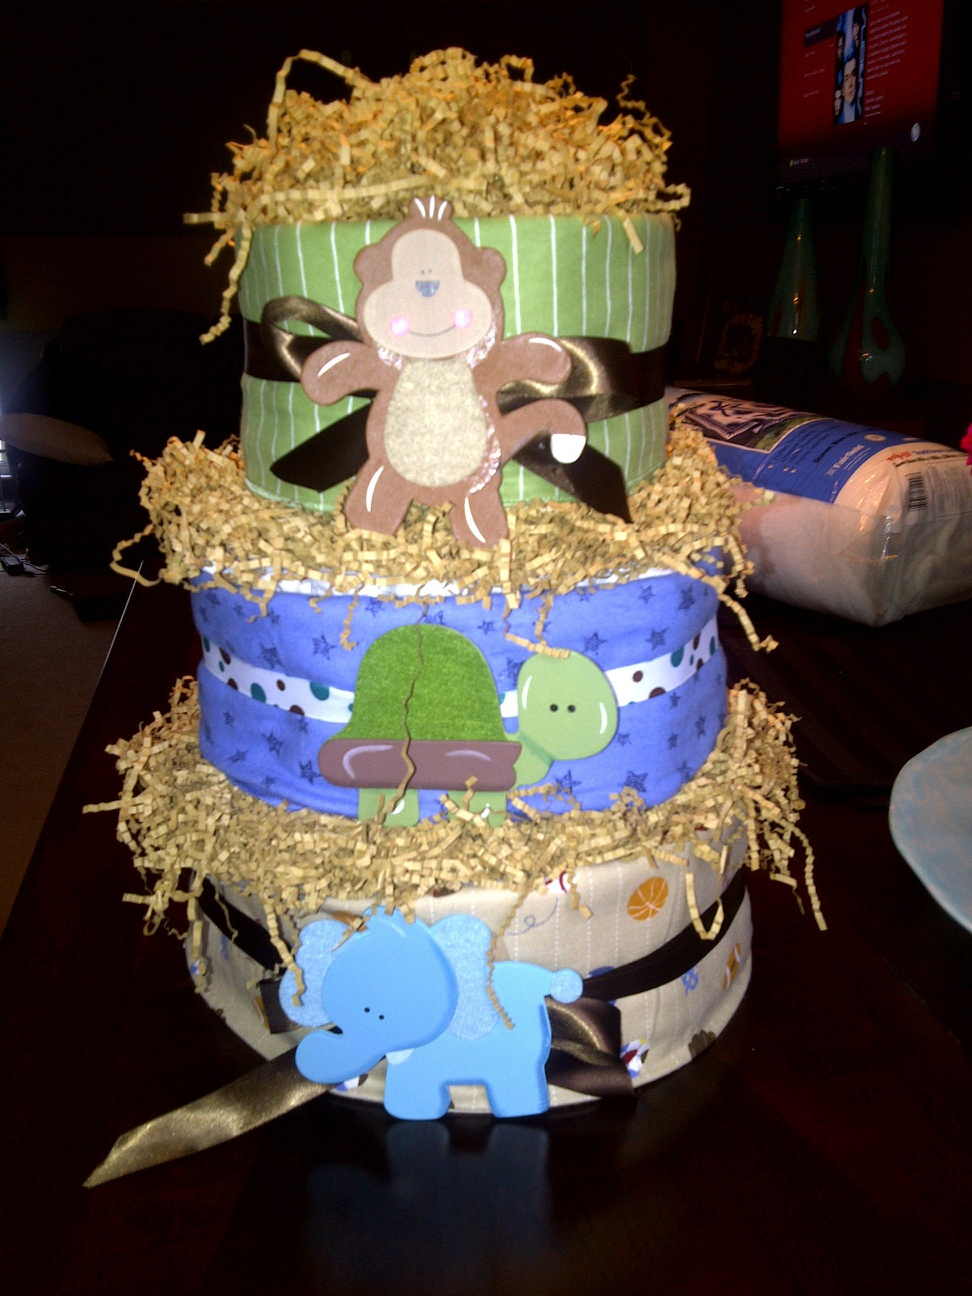 Kroger Bakery Baby Shower Cakes - Images Cake and Photos ...